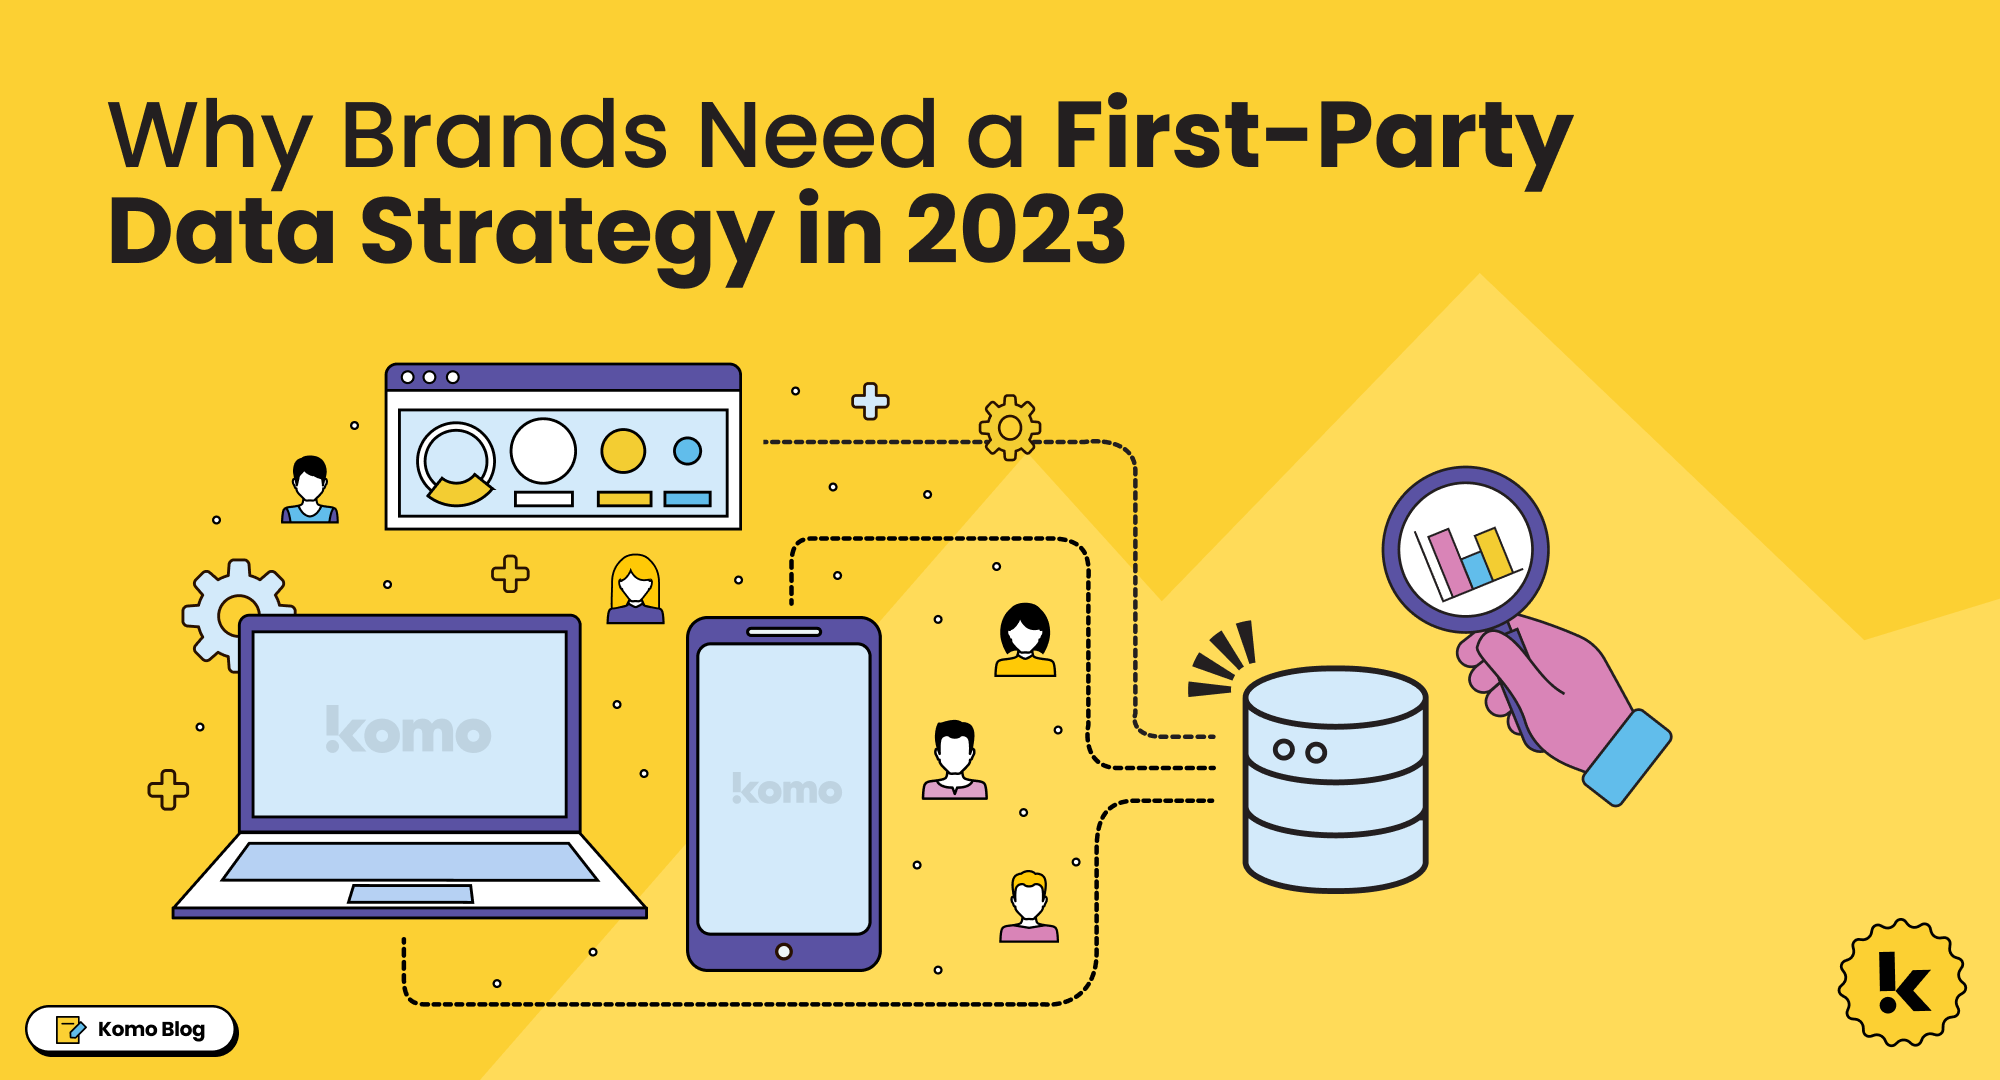 It is time to look at first-party data and how we can ethically navigate the data marketing world.